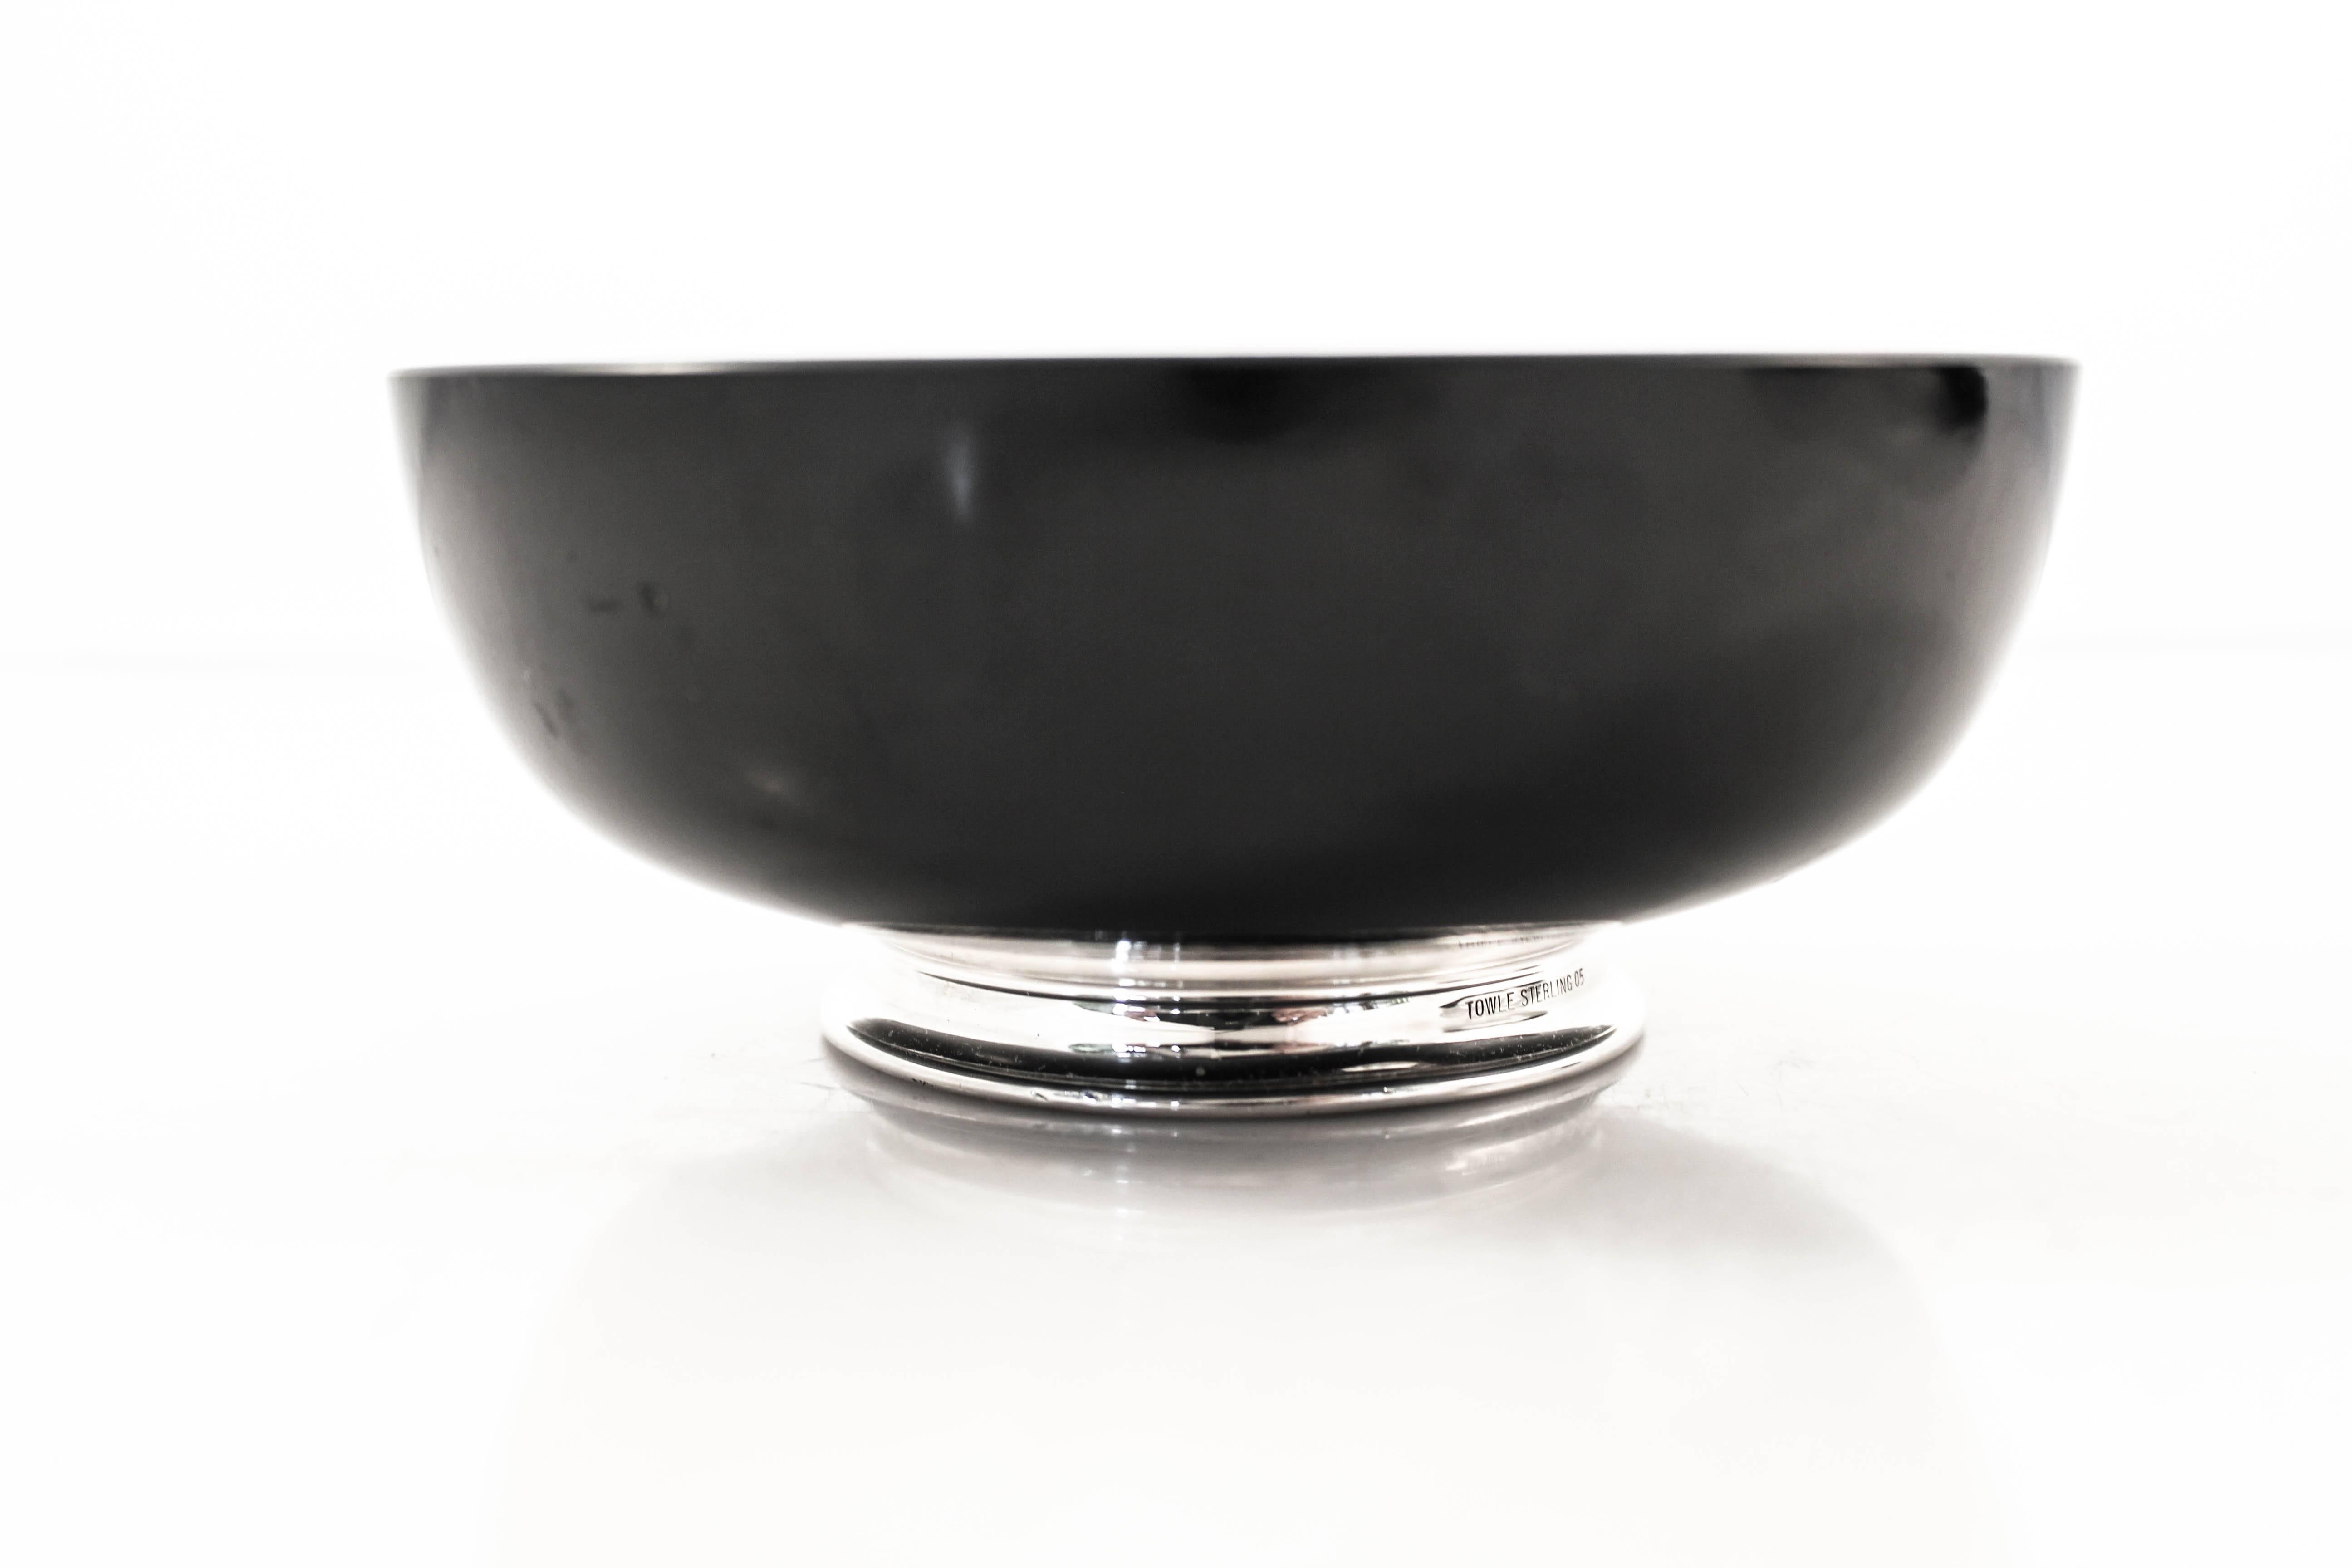 Towle Midcentury Salad Bowl Set In Excellent Condition For Sale In Brooklyn, NY